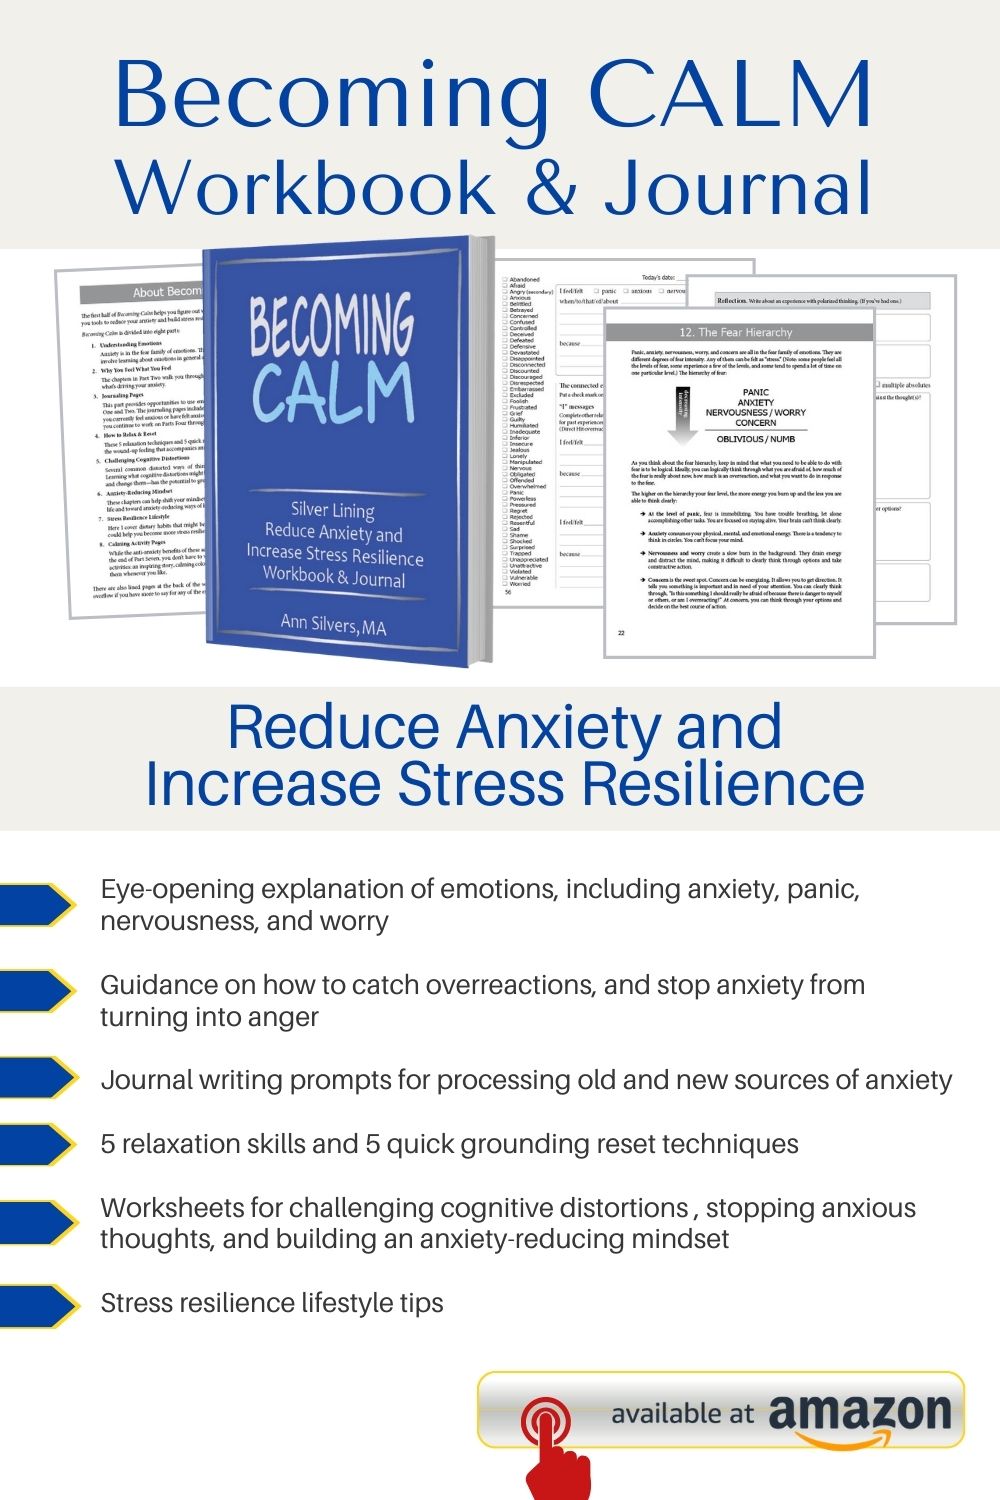 Becoming Calm: Silver Lining Reduce Anxiety and Increase Stress Resilience Workbook and Journal 